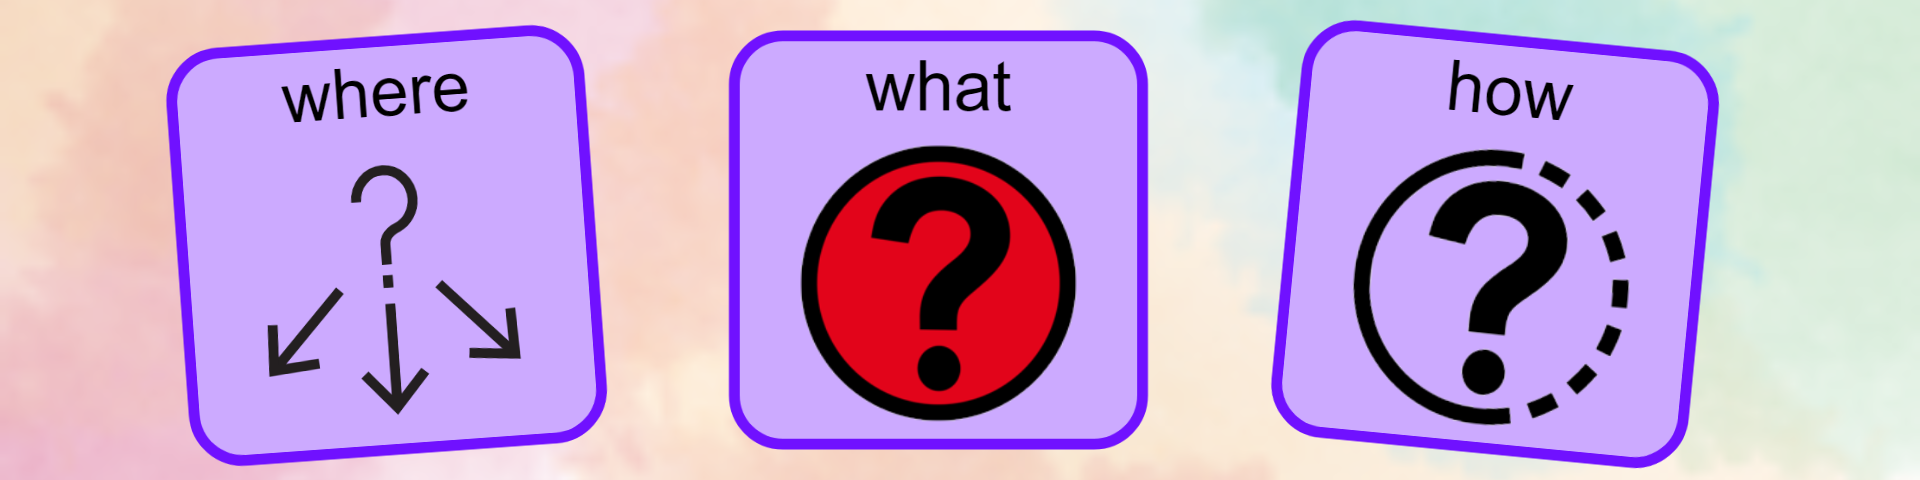 purple speech buttons with the words "where," "what," and "how" on a colorful pastel background.